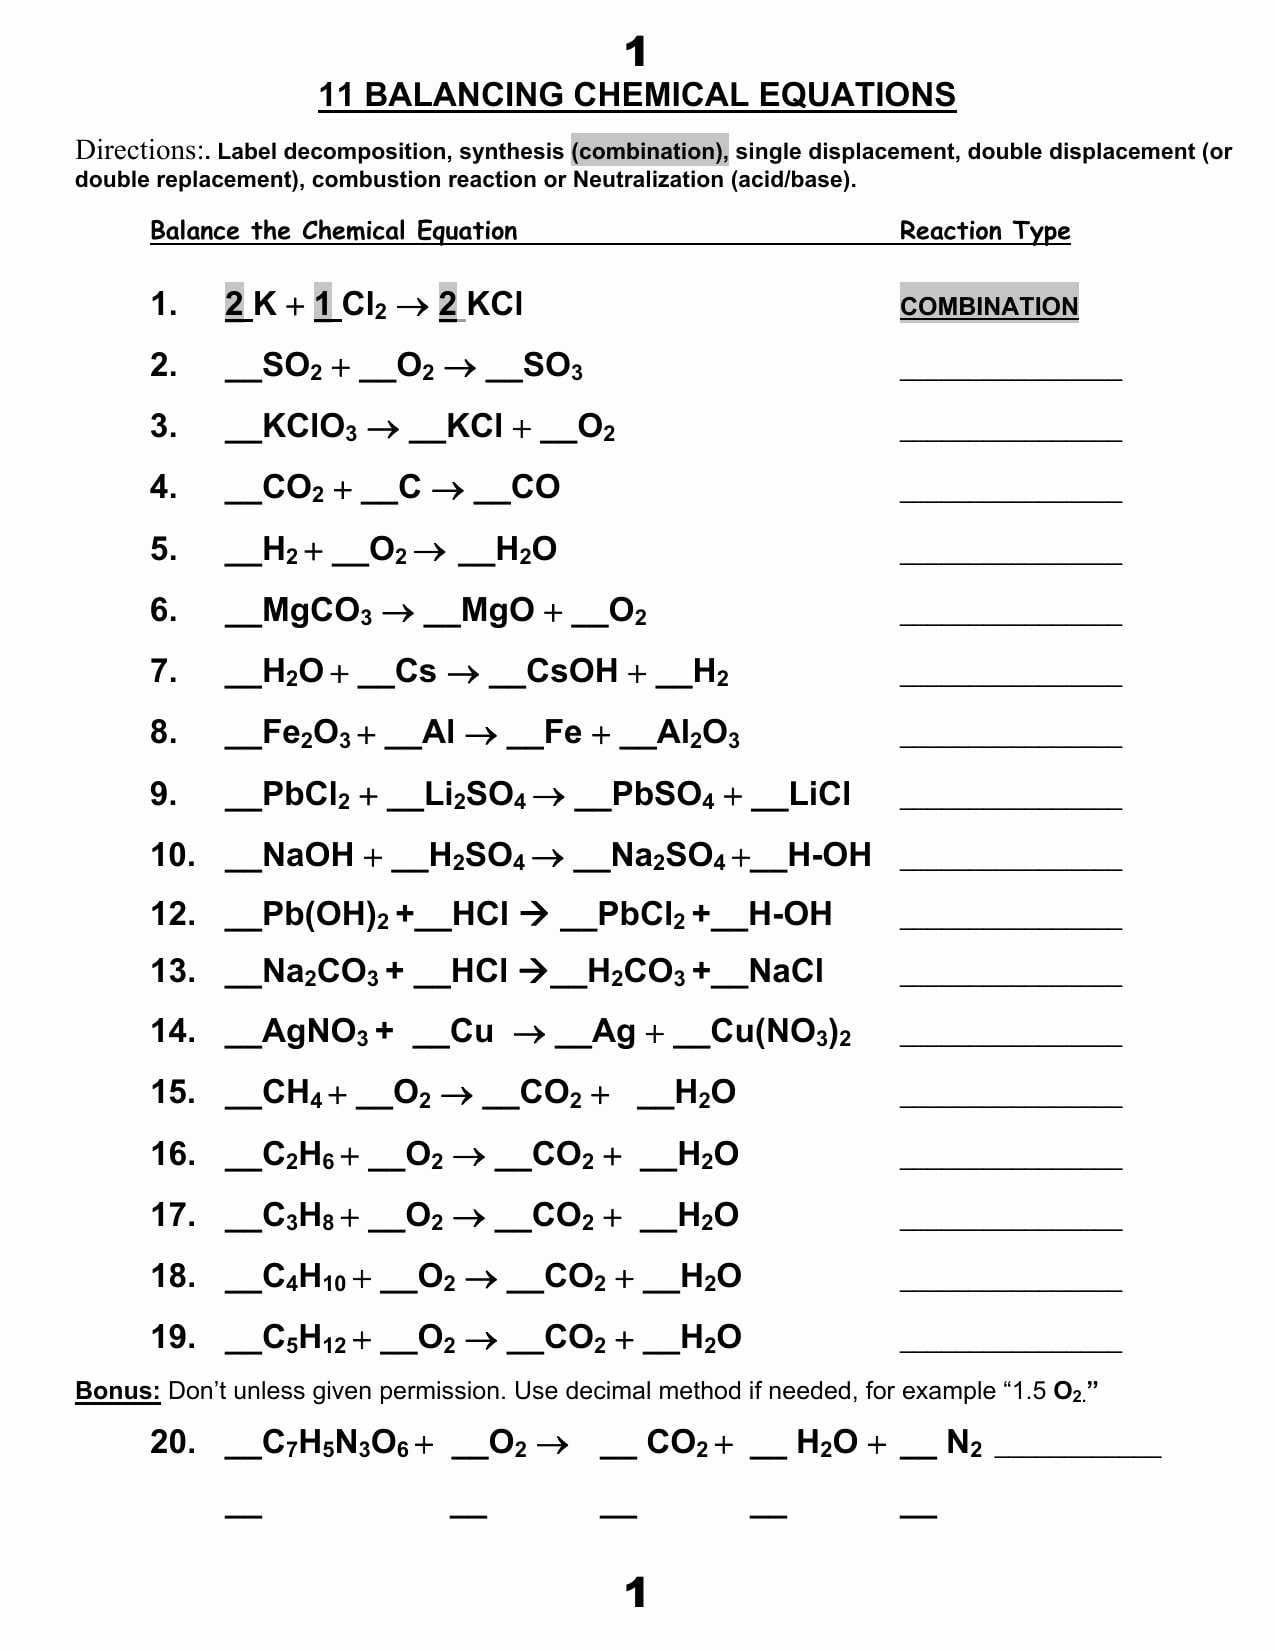 Synthesis And Decomposition Reactions Worksheet Answers db excel com